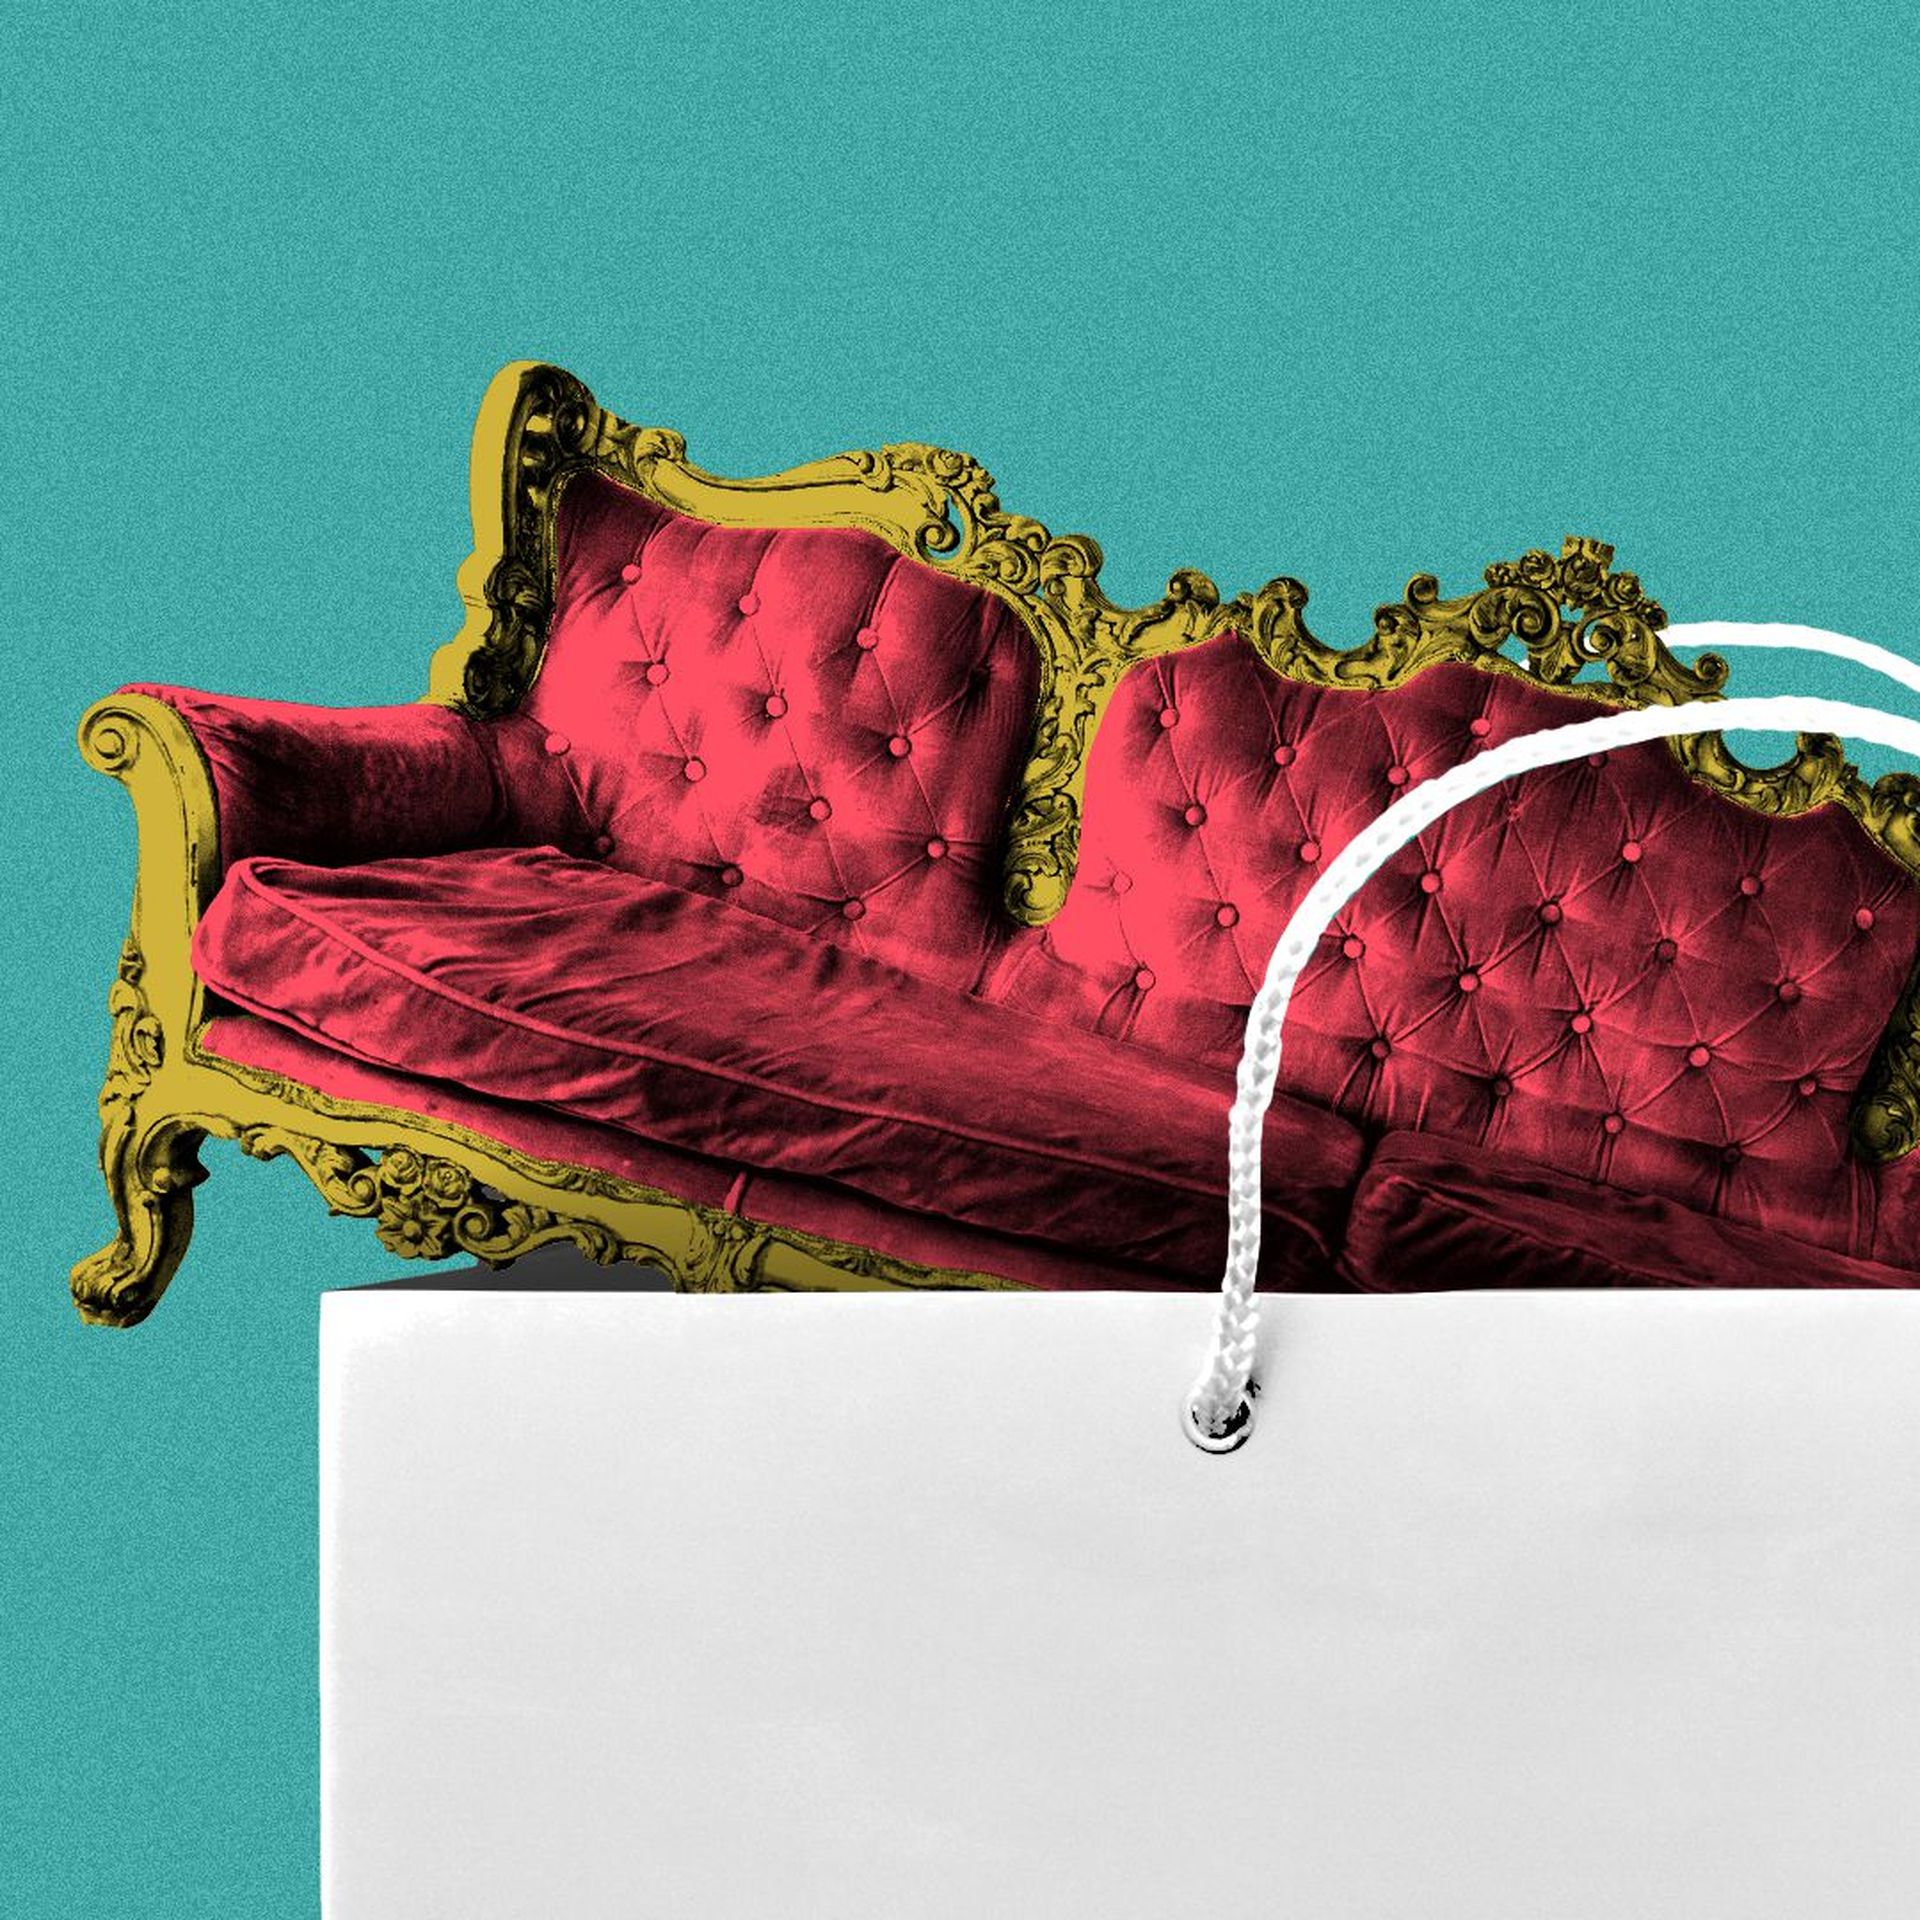 Illustration of an antique couch sticking out of a shopping bag.